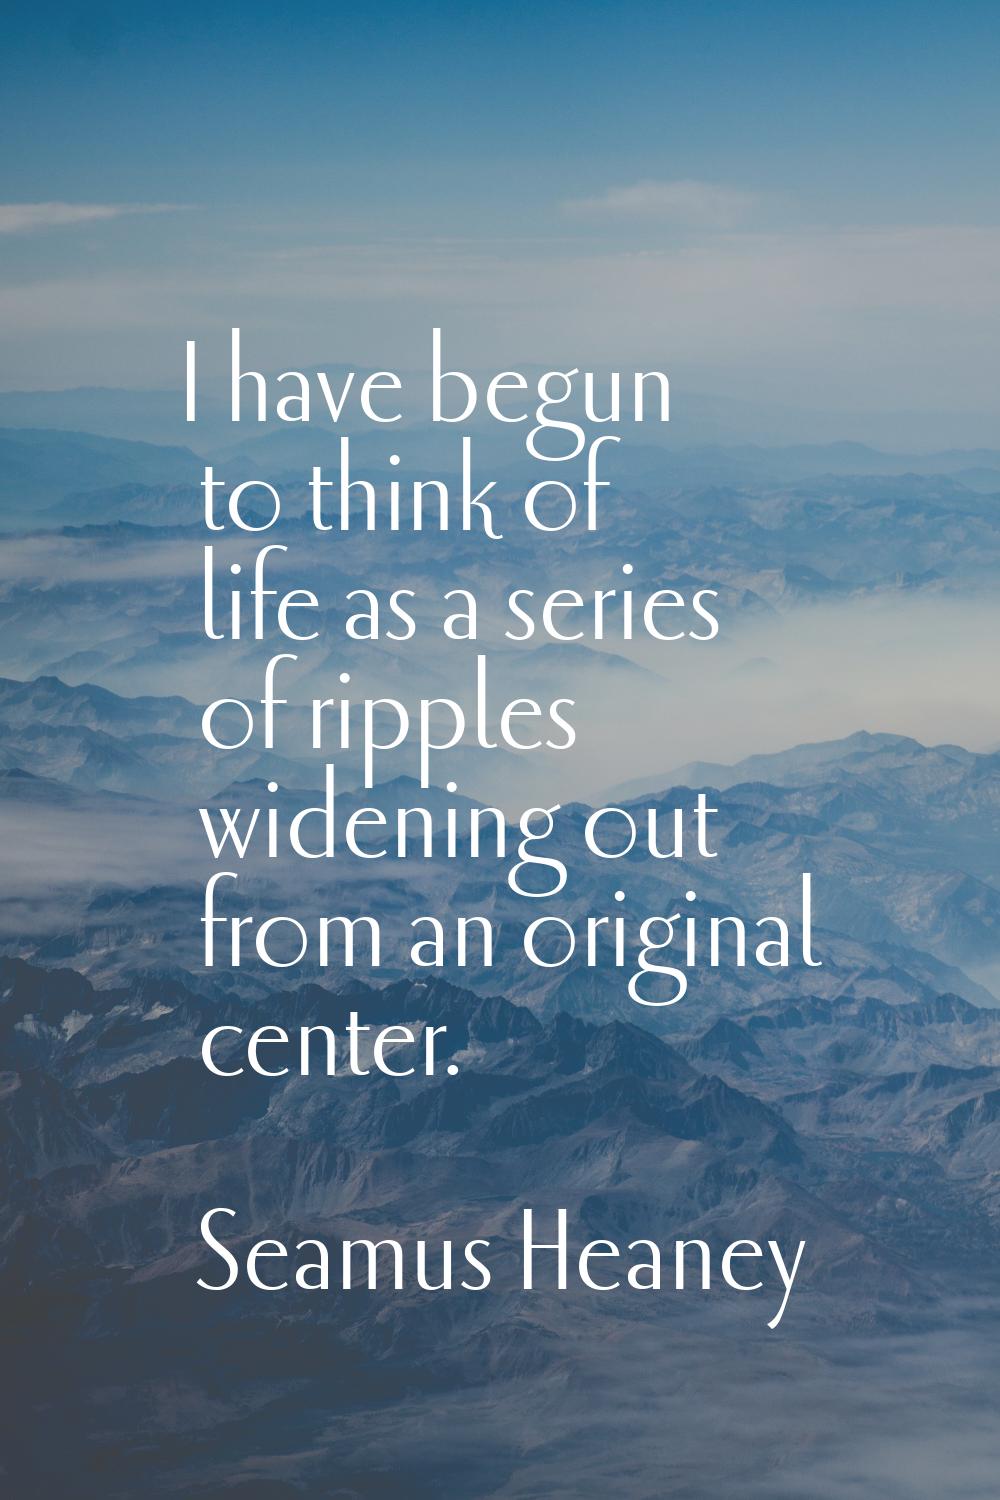 I have begun to think of life as a series of ripples widening out from an original center.